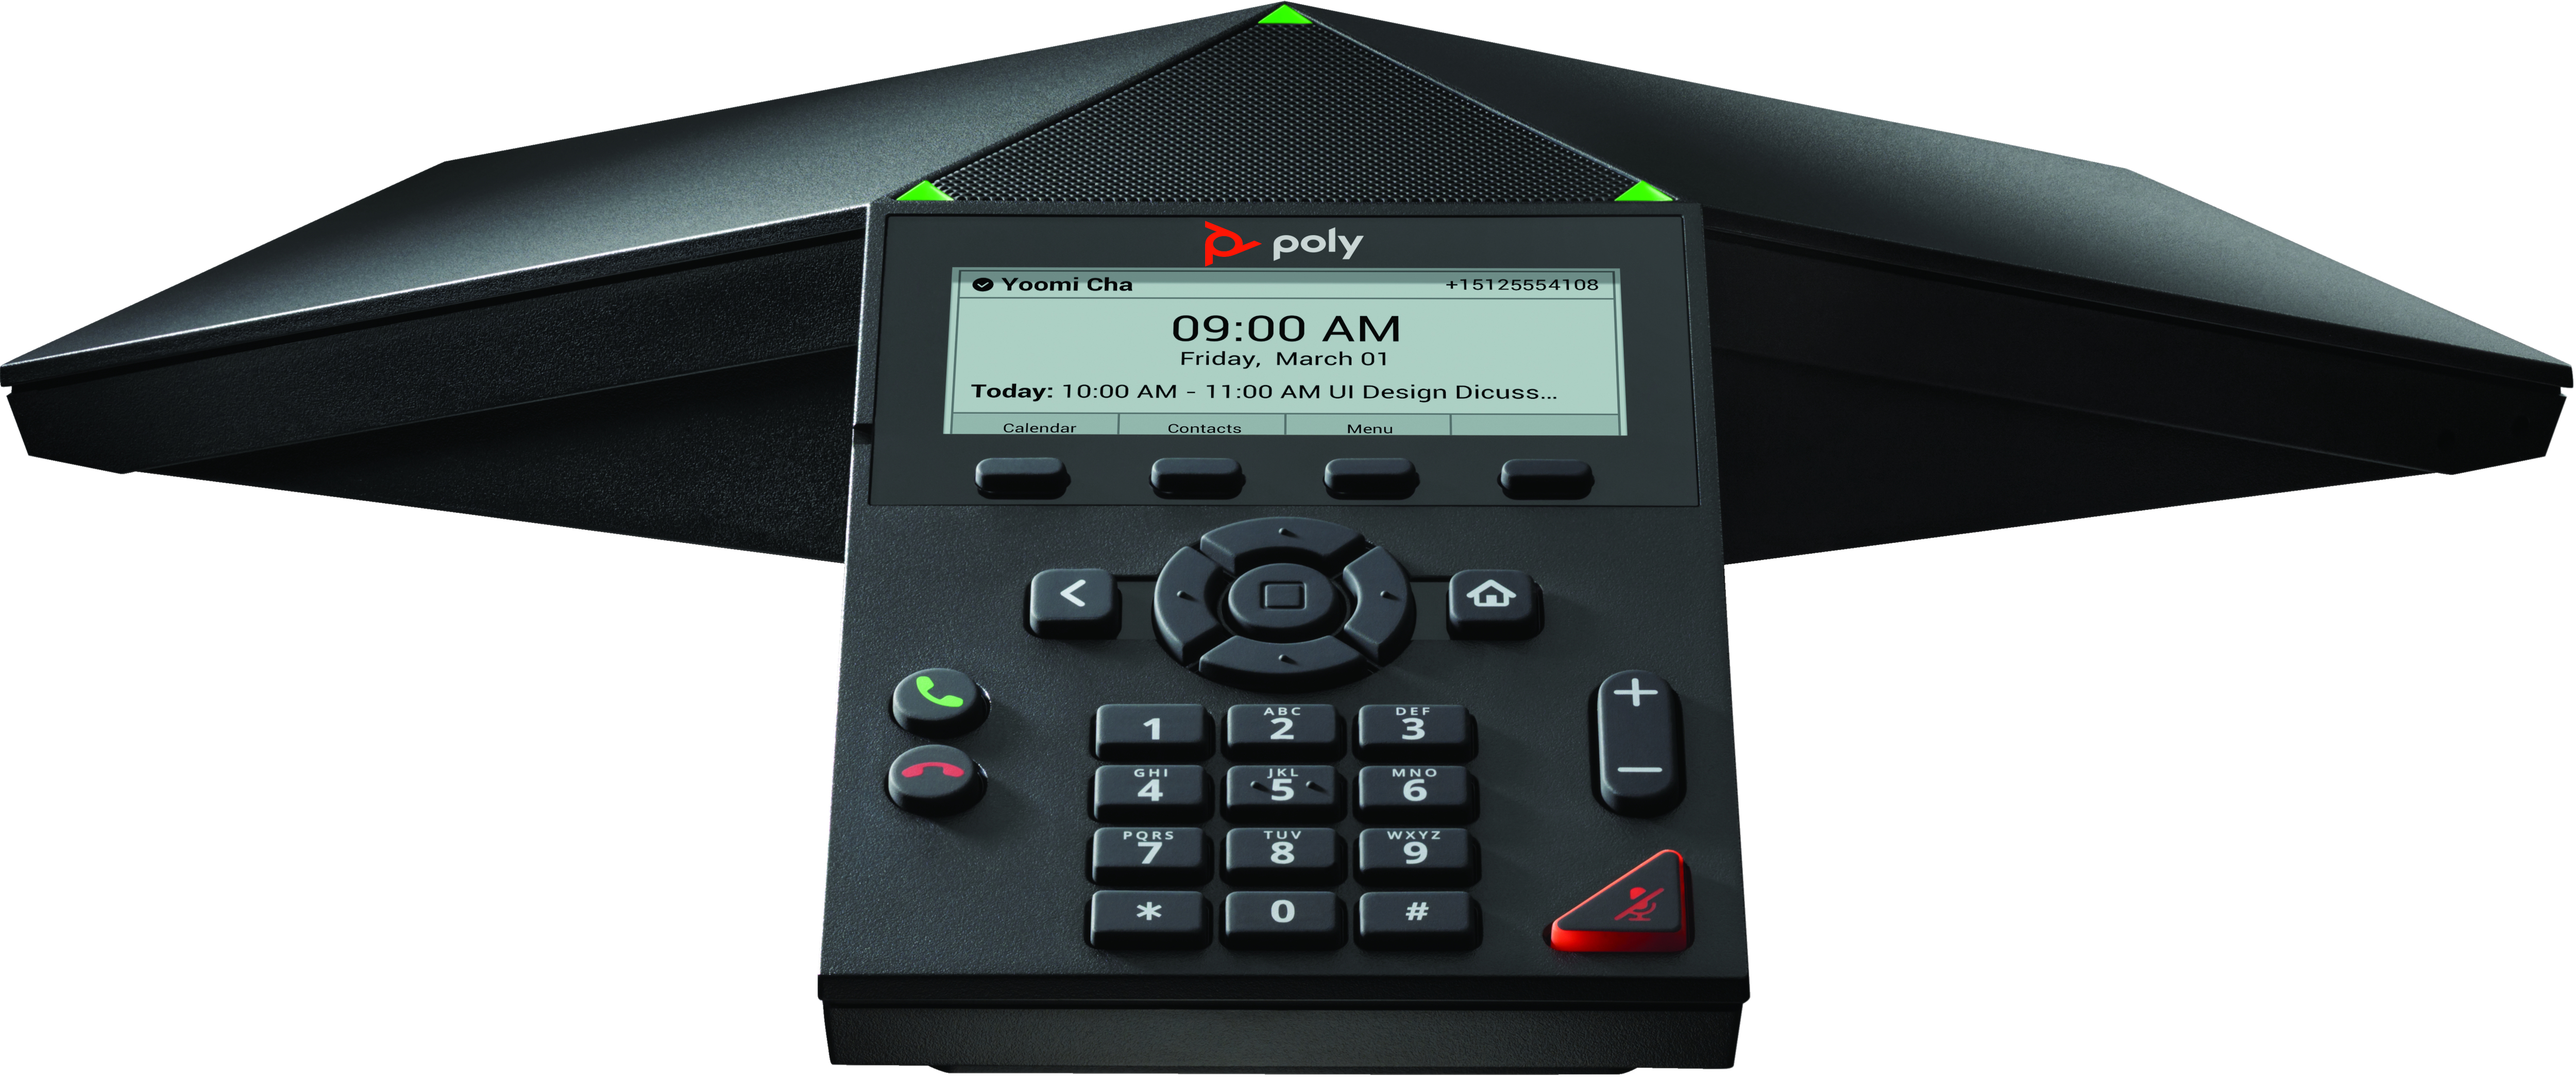 POLY HP Poly Trio 8300 IP Conference Phone